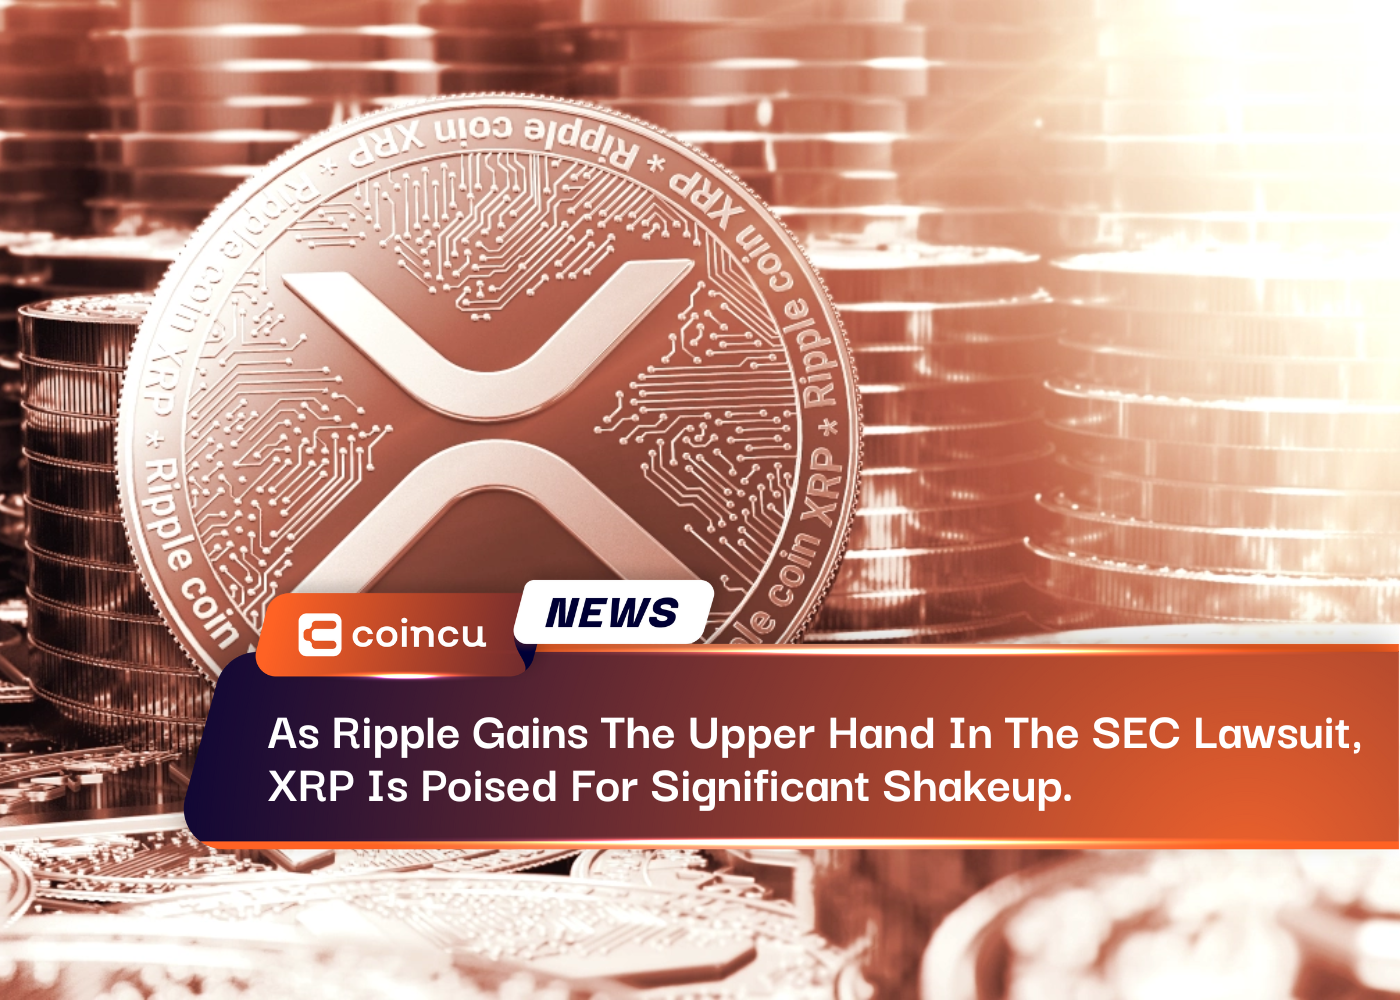 As Ripple Gains The Upper Hand In The SEC Lawsuit, XRP Is Poised For Significant Shakeup.